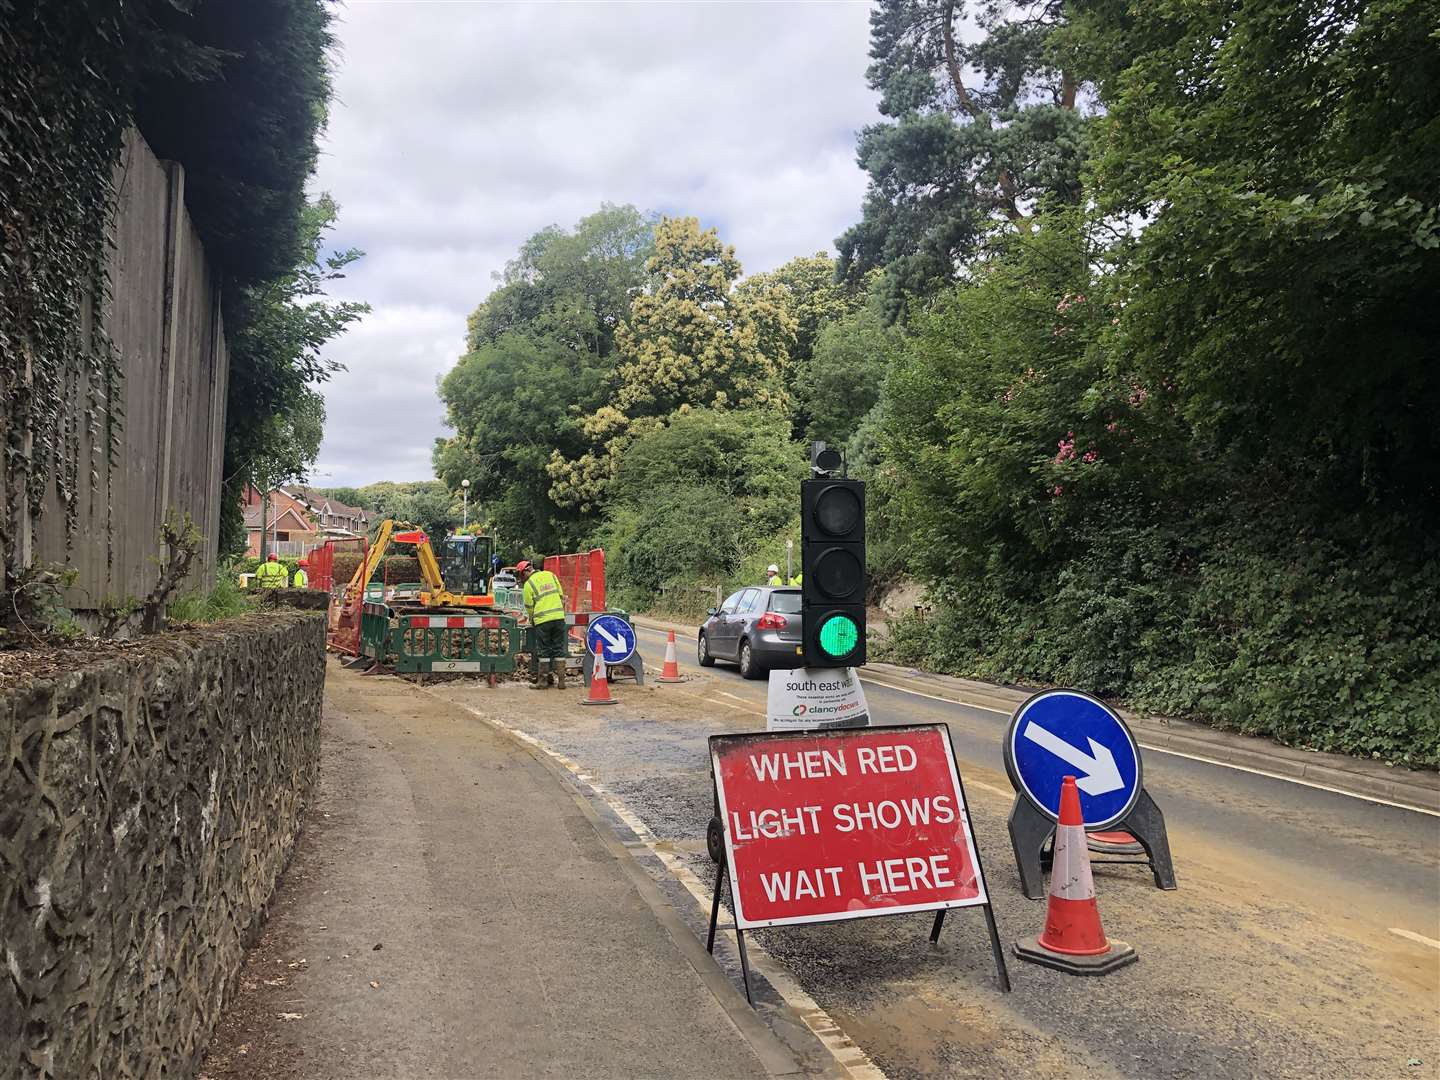 Work is ongoing to fix a burst water main in Ware Street, Bearsted (13829915)